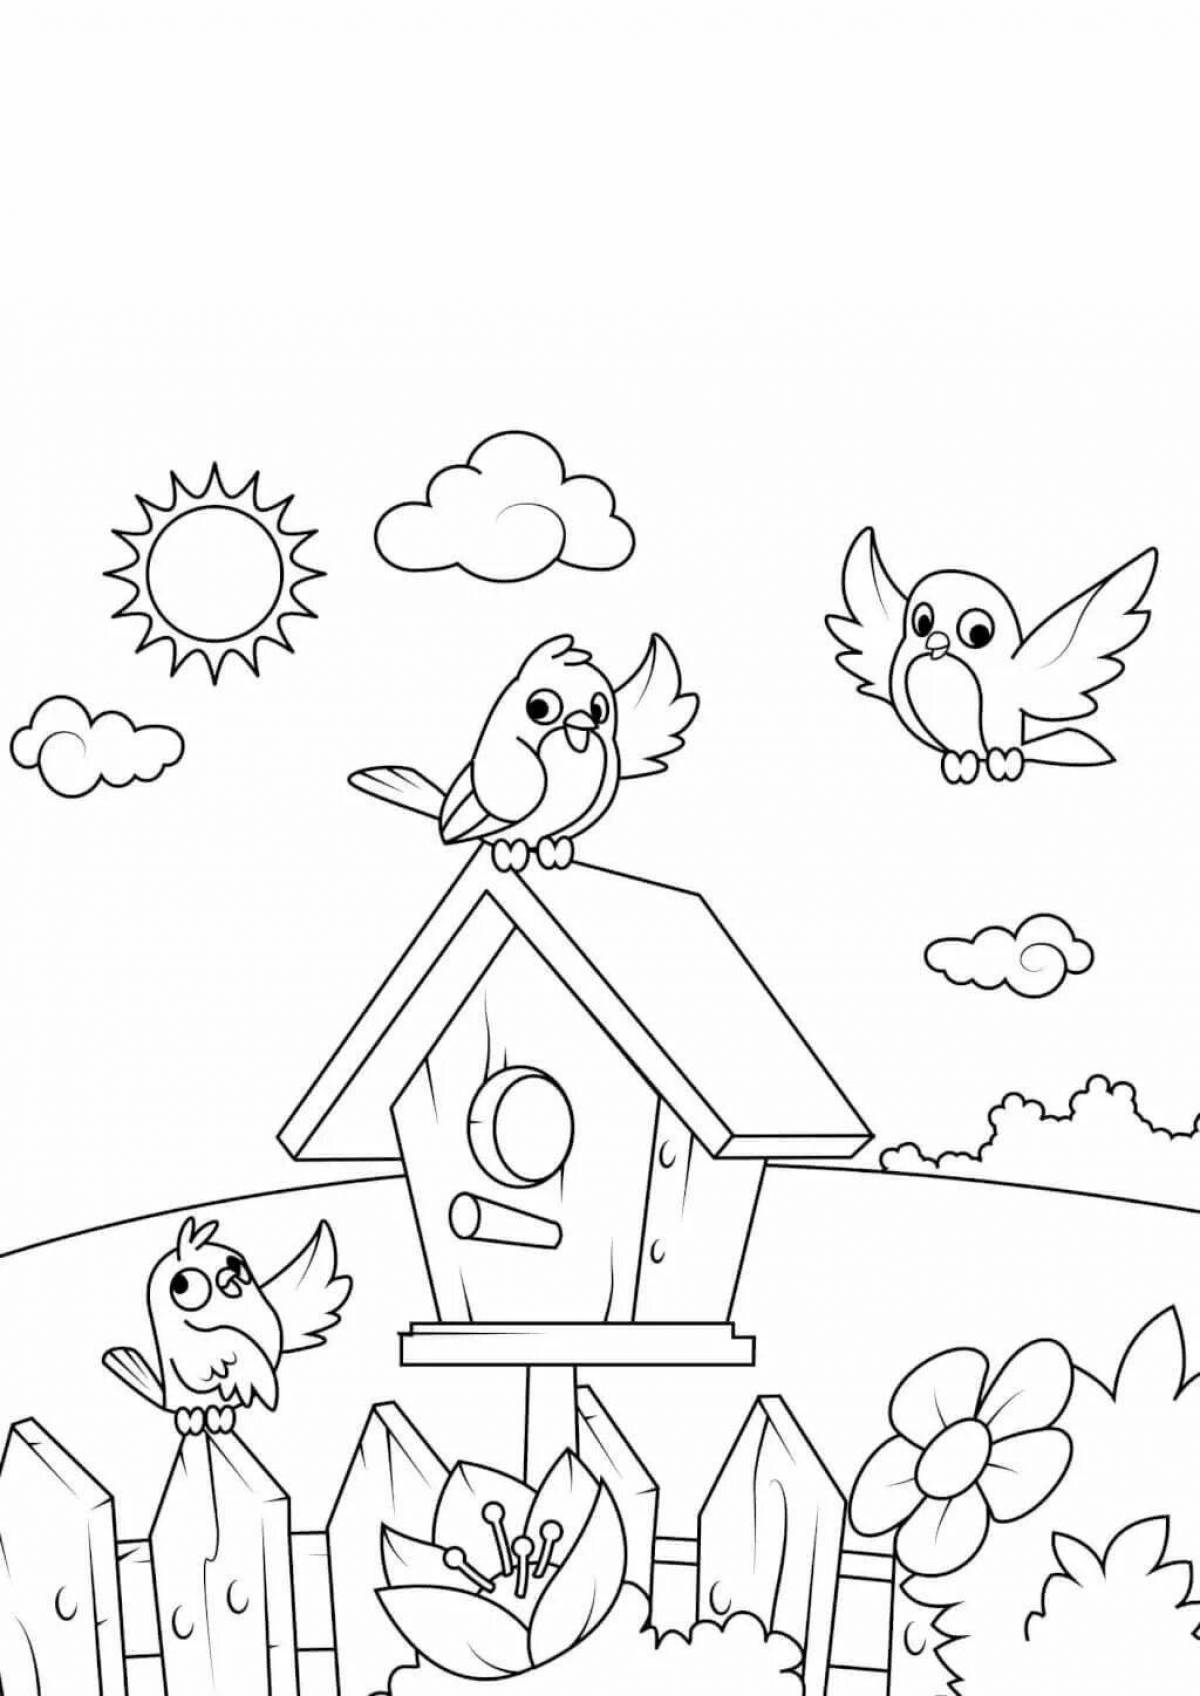 Great spring coloring book for 4-5 year olds